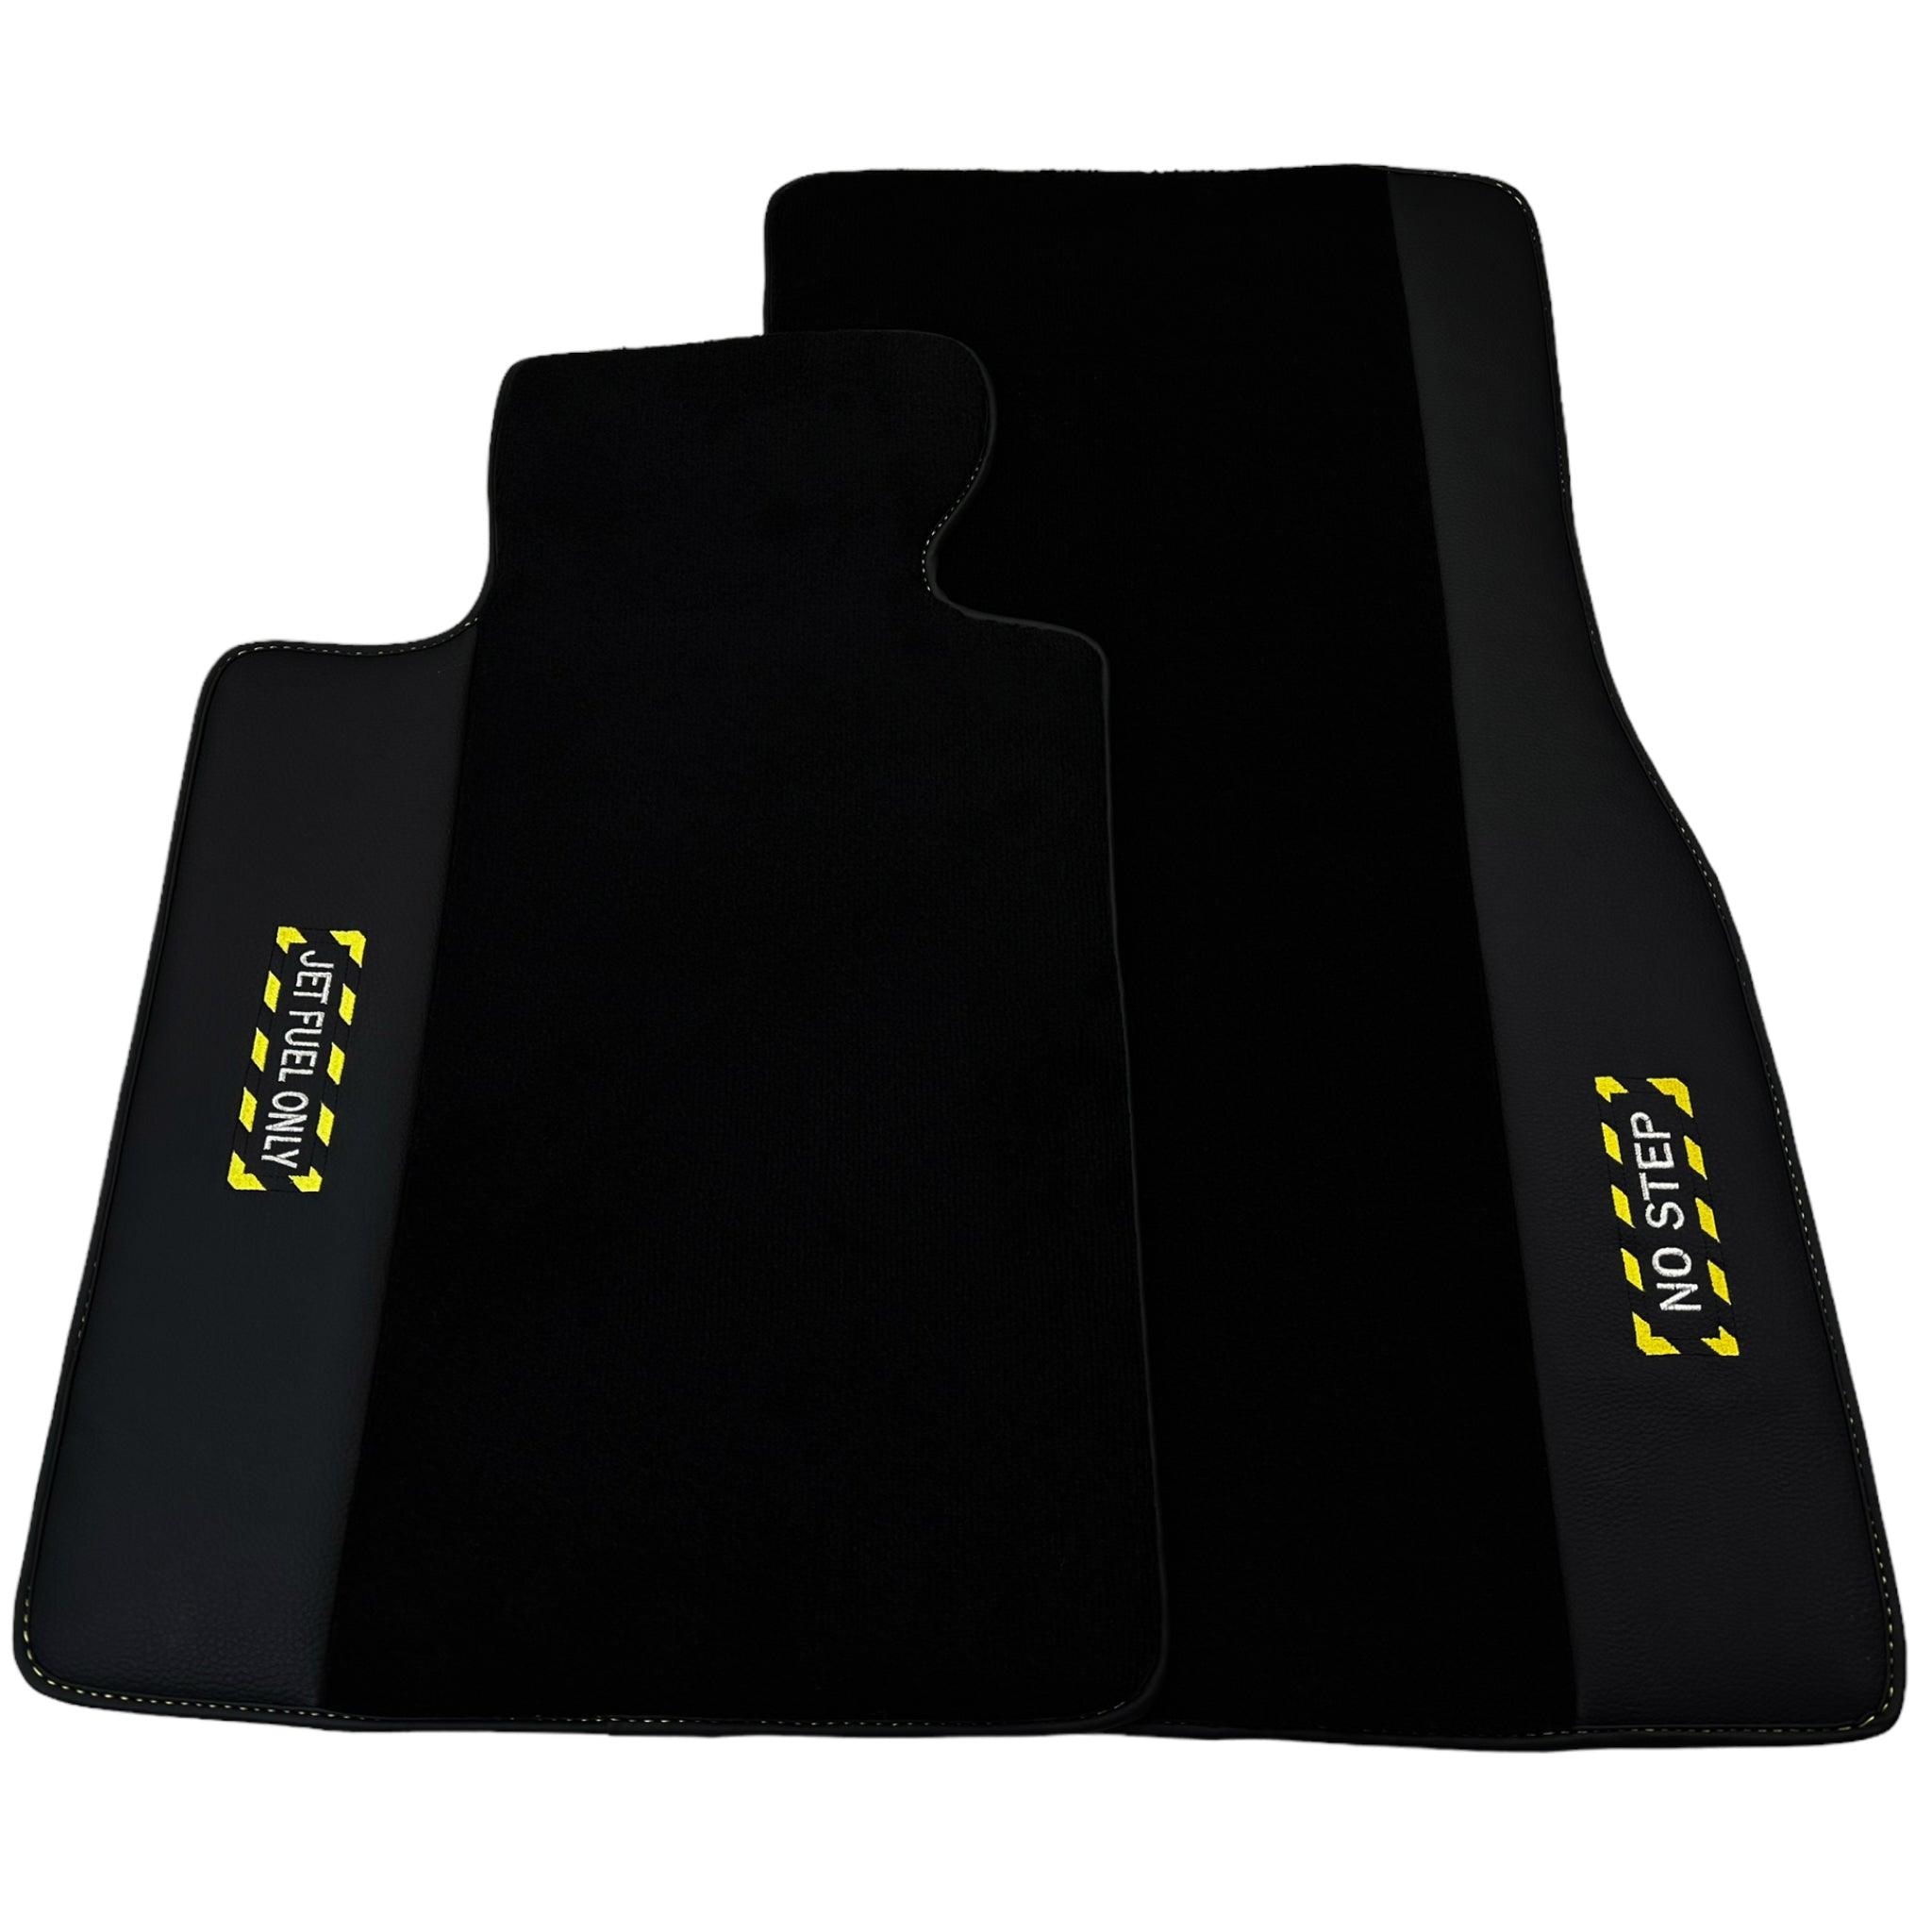 Black Floor Mats For BMW X6M E71 SUV | Fighter Jet Edition - AutoWin